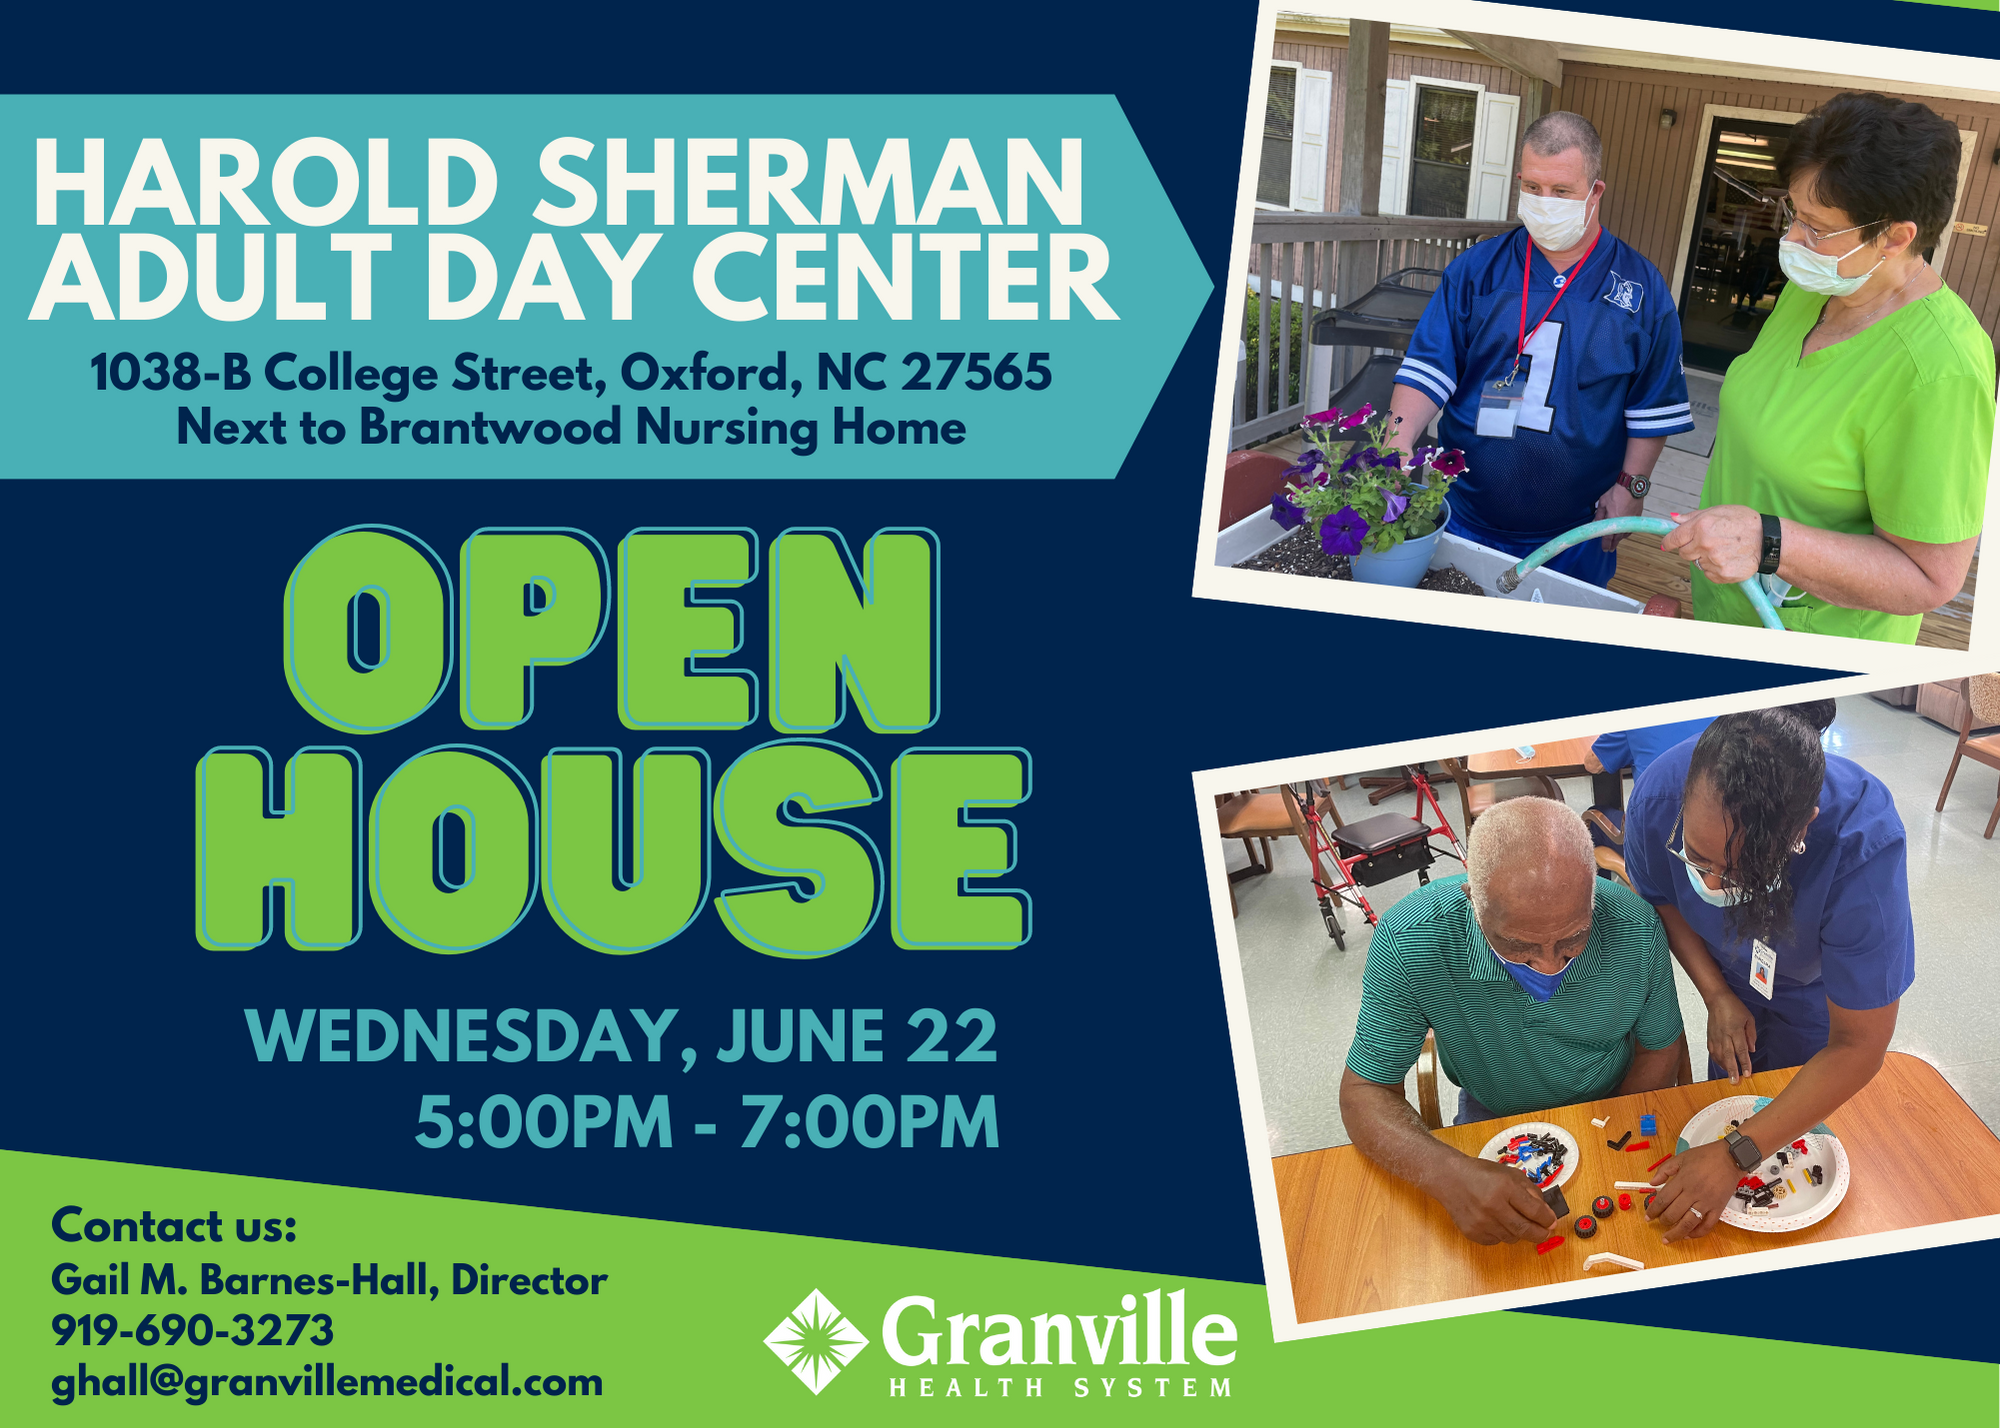 Harold Sherman Adult Day Center to Host Open House on June 22 from 5:00PM – 7:00PM